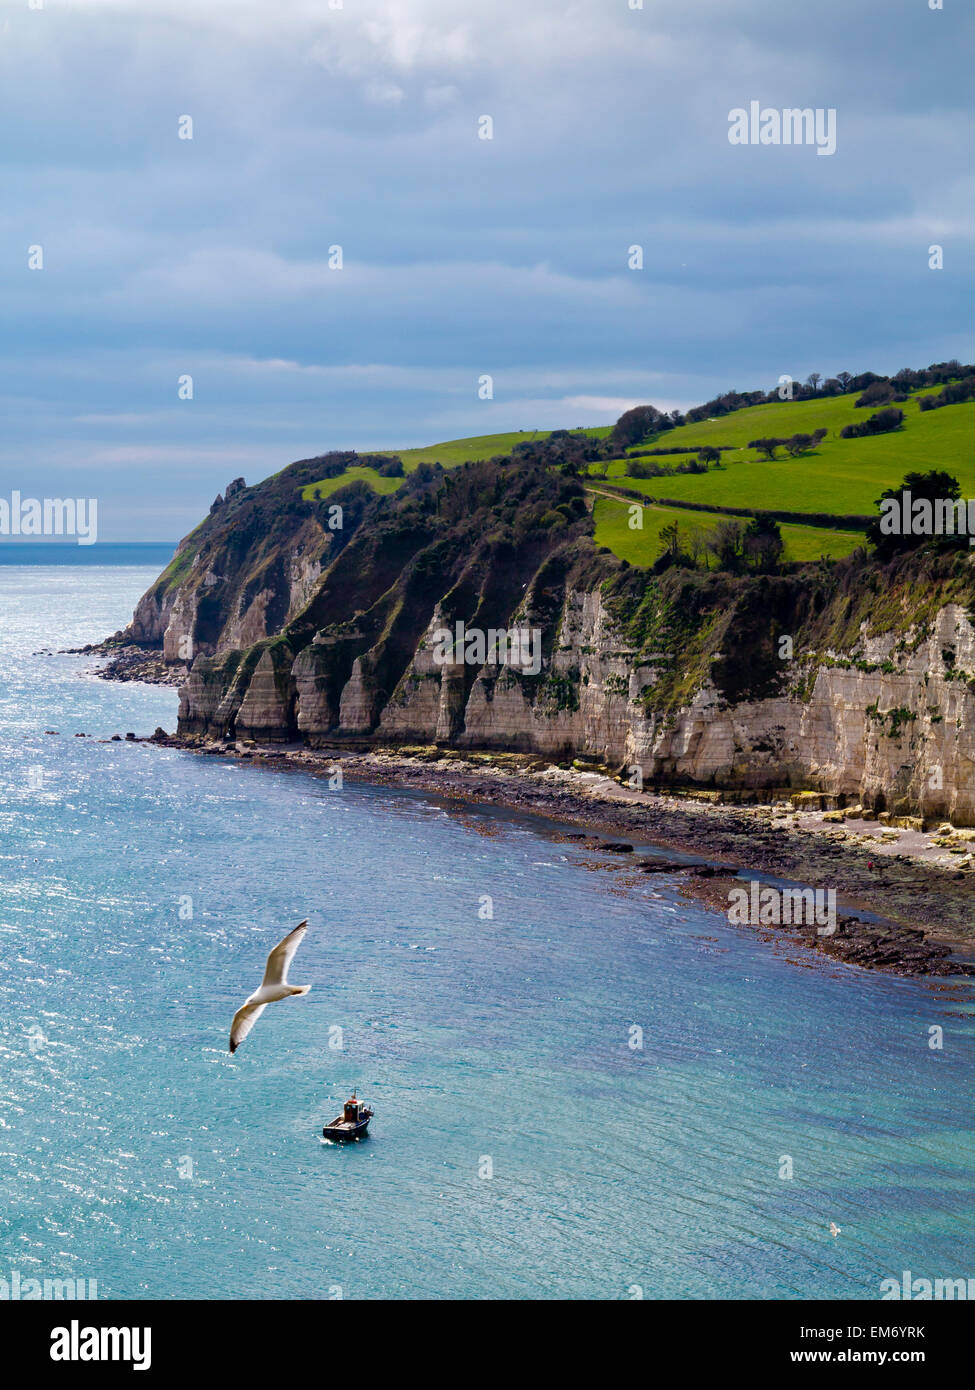 A view taken from the headland showing the cliffs and cove at Beer, Devon England UK with a seagull in the foreground Stock Photo